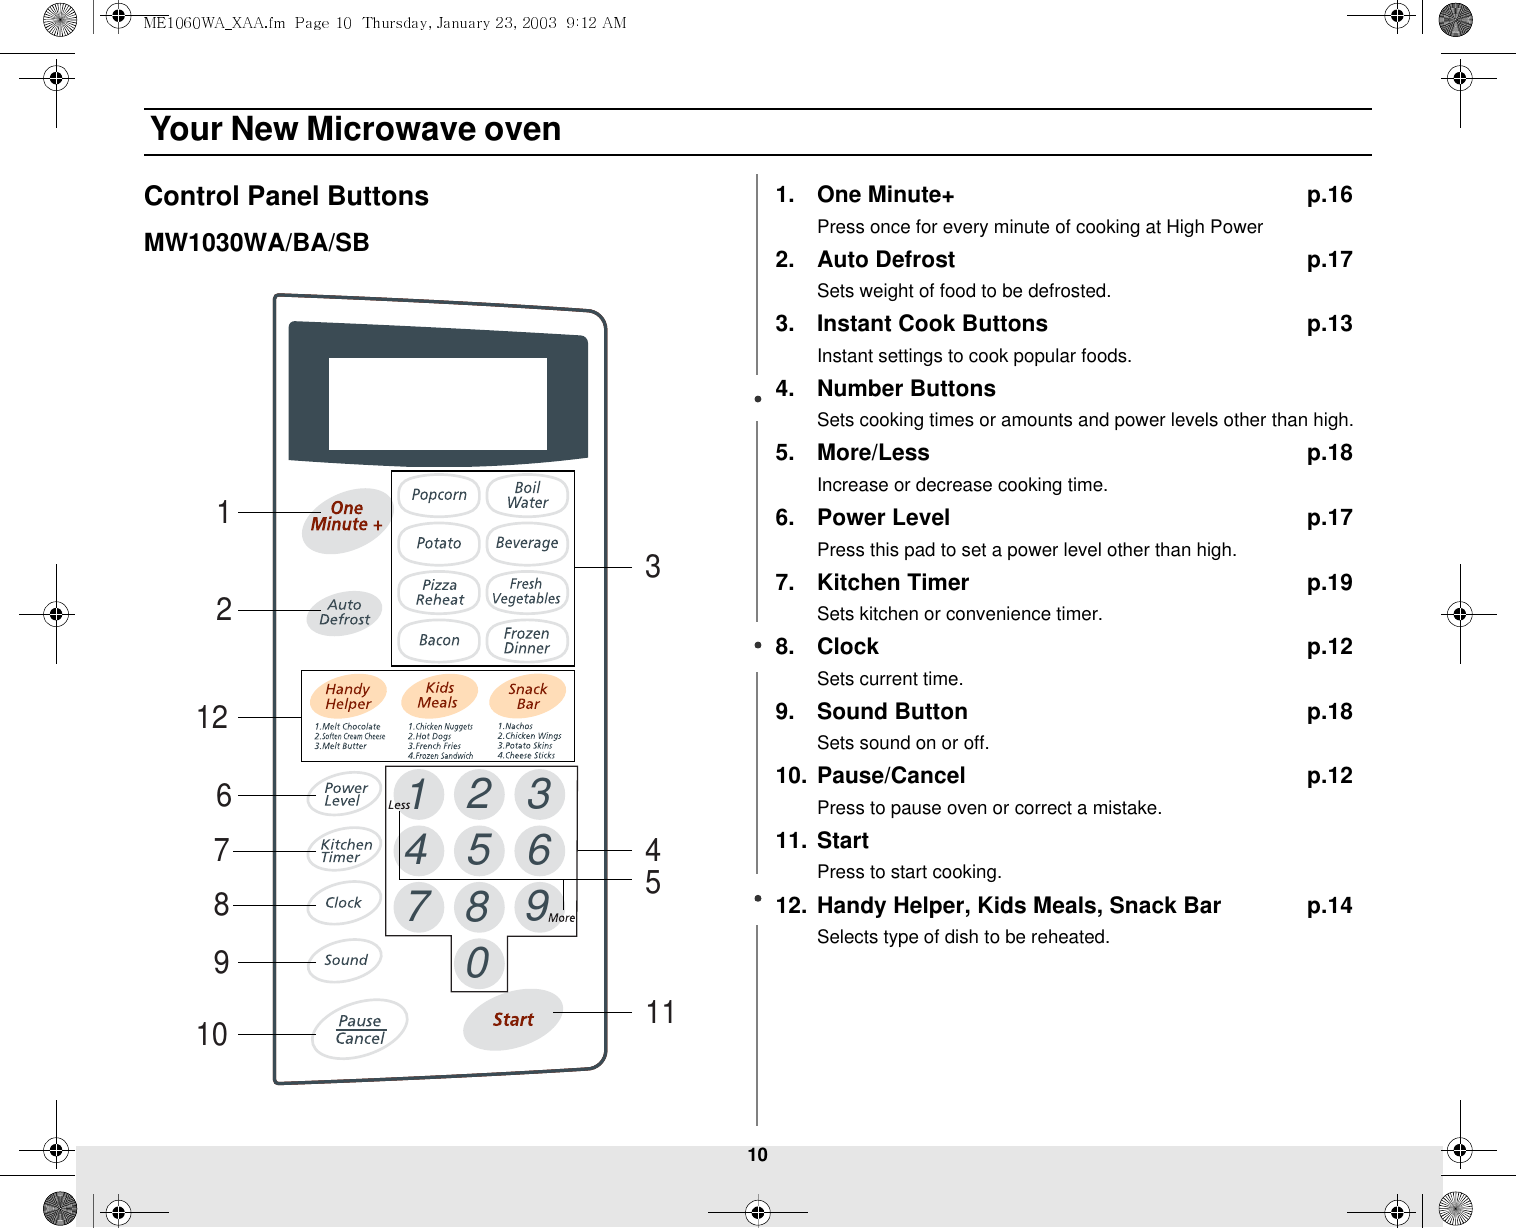 10 Your New Microwave ovenControl Panel ButtonsMW1030WA/BA/SB1. One Minute+ p.16Press once for every minute of cooking at High Power2. Auto Defrost p.17 Sets weight of food to be defrosted.3. Instant Cook Buttons p.13Instant settings to cook popular foods.4. Number ButtonsSets cooking times or amounts and power levels other than high.5. More/Less p.18Increase or decrease cooking time.6. Power Level p.17Press this pad to set a power level other than high.7. Kitchen Timer p.19Sets kitchen or convenience timer.8. Clock p.12Sets current time.9. Sound Button p.18Sets sound on or off.10. Pause/Cancel p.12Press to pause oven or correct a mistake.11. StartPress to start cooking.12. Handy Helper, Kids Meals, Snack Bar p.14Selects type of dish to be reheated.3216549870134511267891012